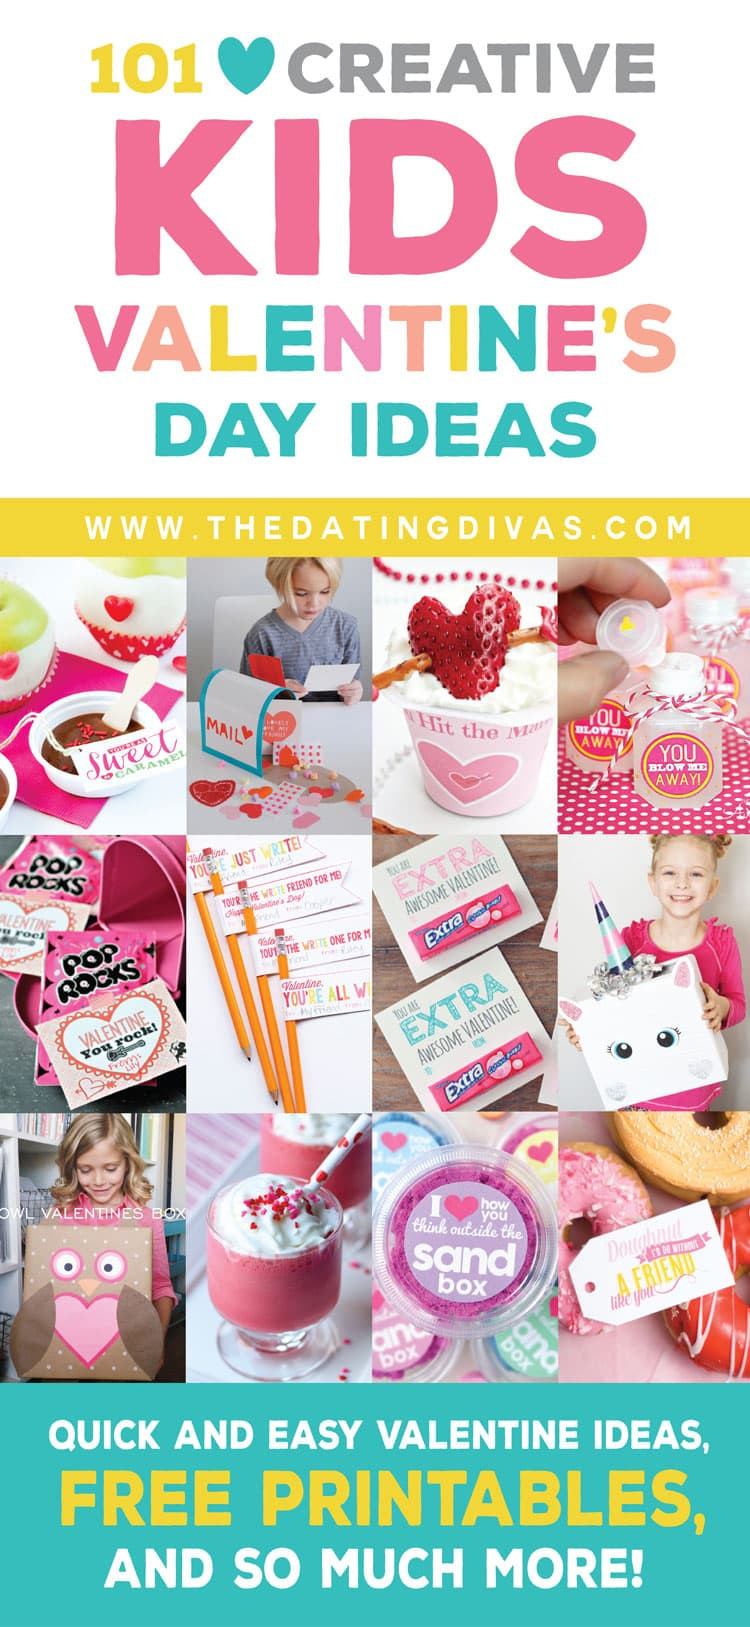 Valentines Day Date Ideas
 Kids Valentine s Day Ideas From The Dating Divas